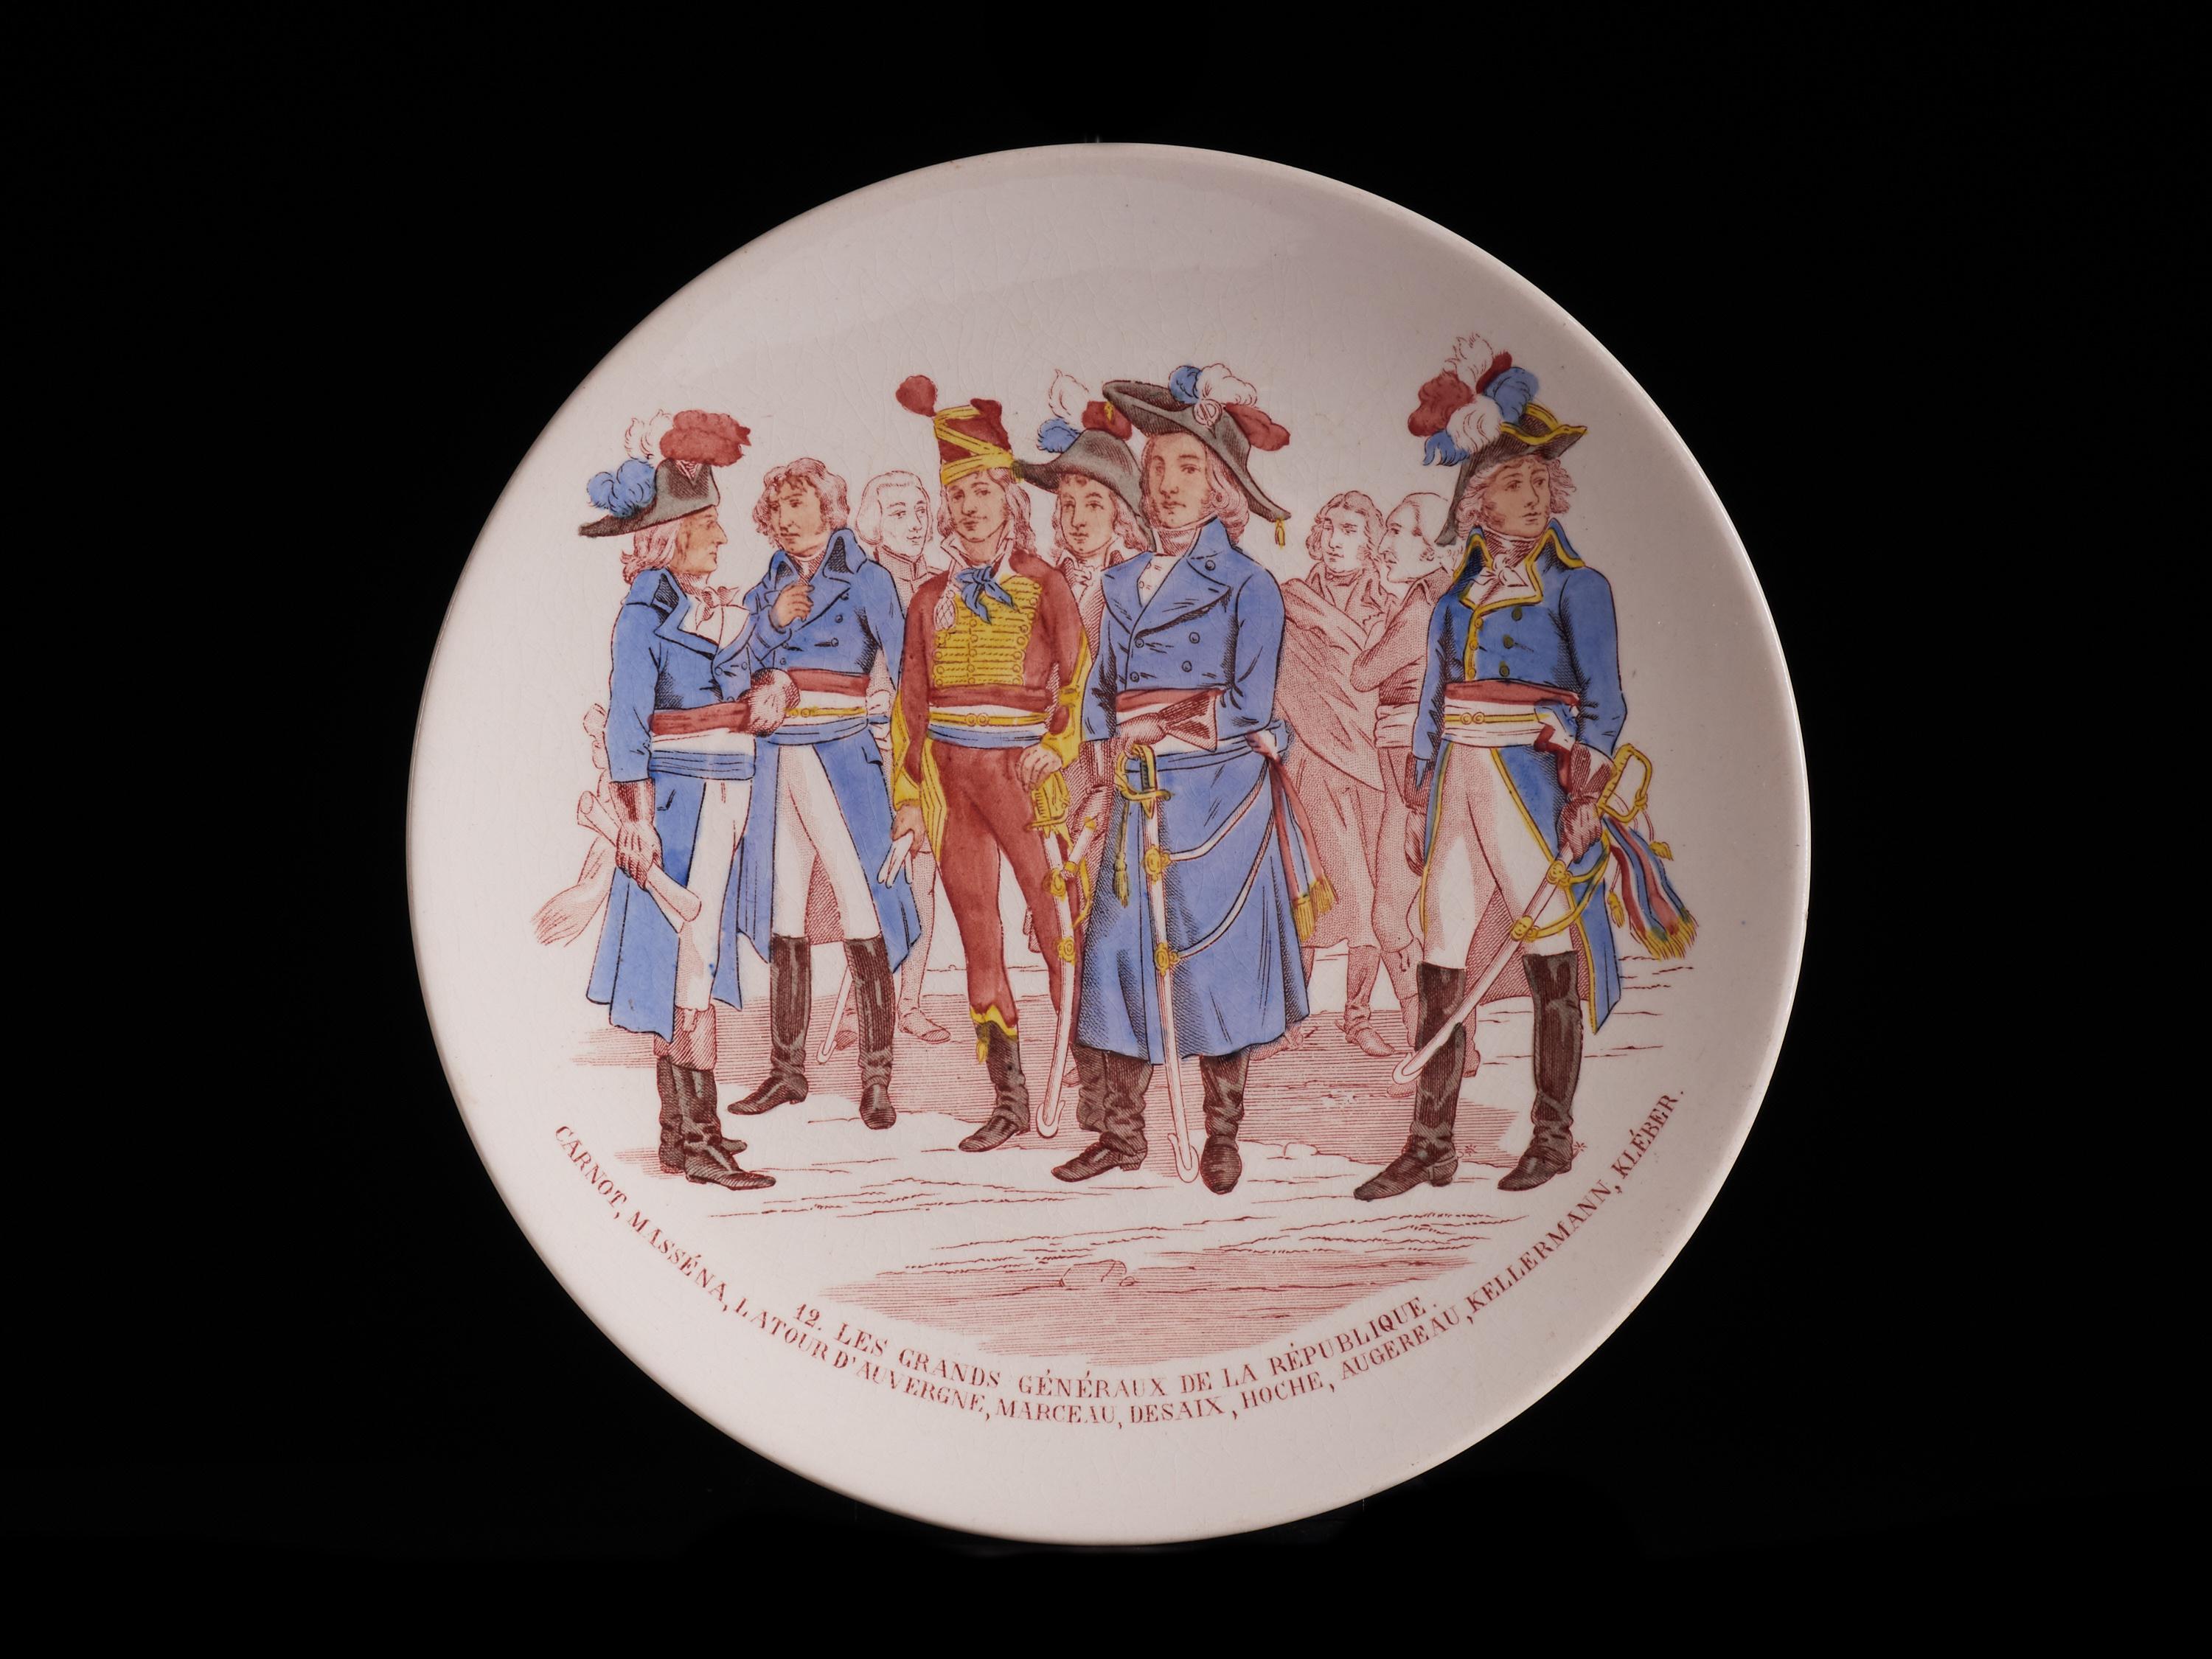 Excellent set of 7 white faïencerie plates from the late 19th Century depicting scenes of 1792 events in France, at the time it was at war with the Bohemian and Hungarian kingdoms. The items are superbly painted with stamped red designs based on a